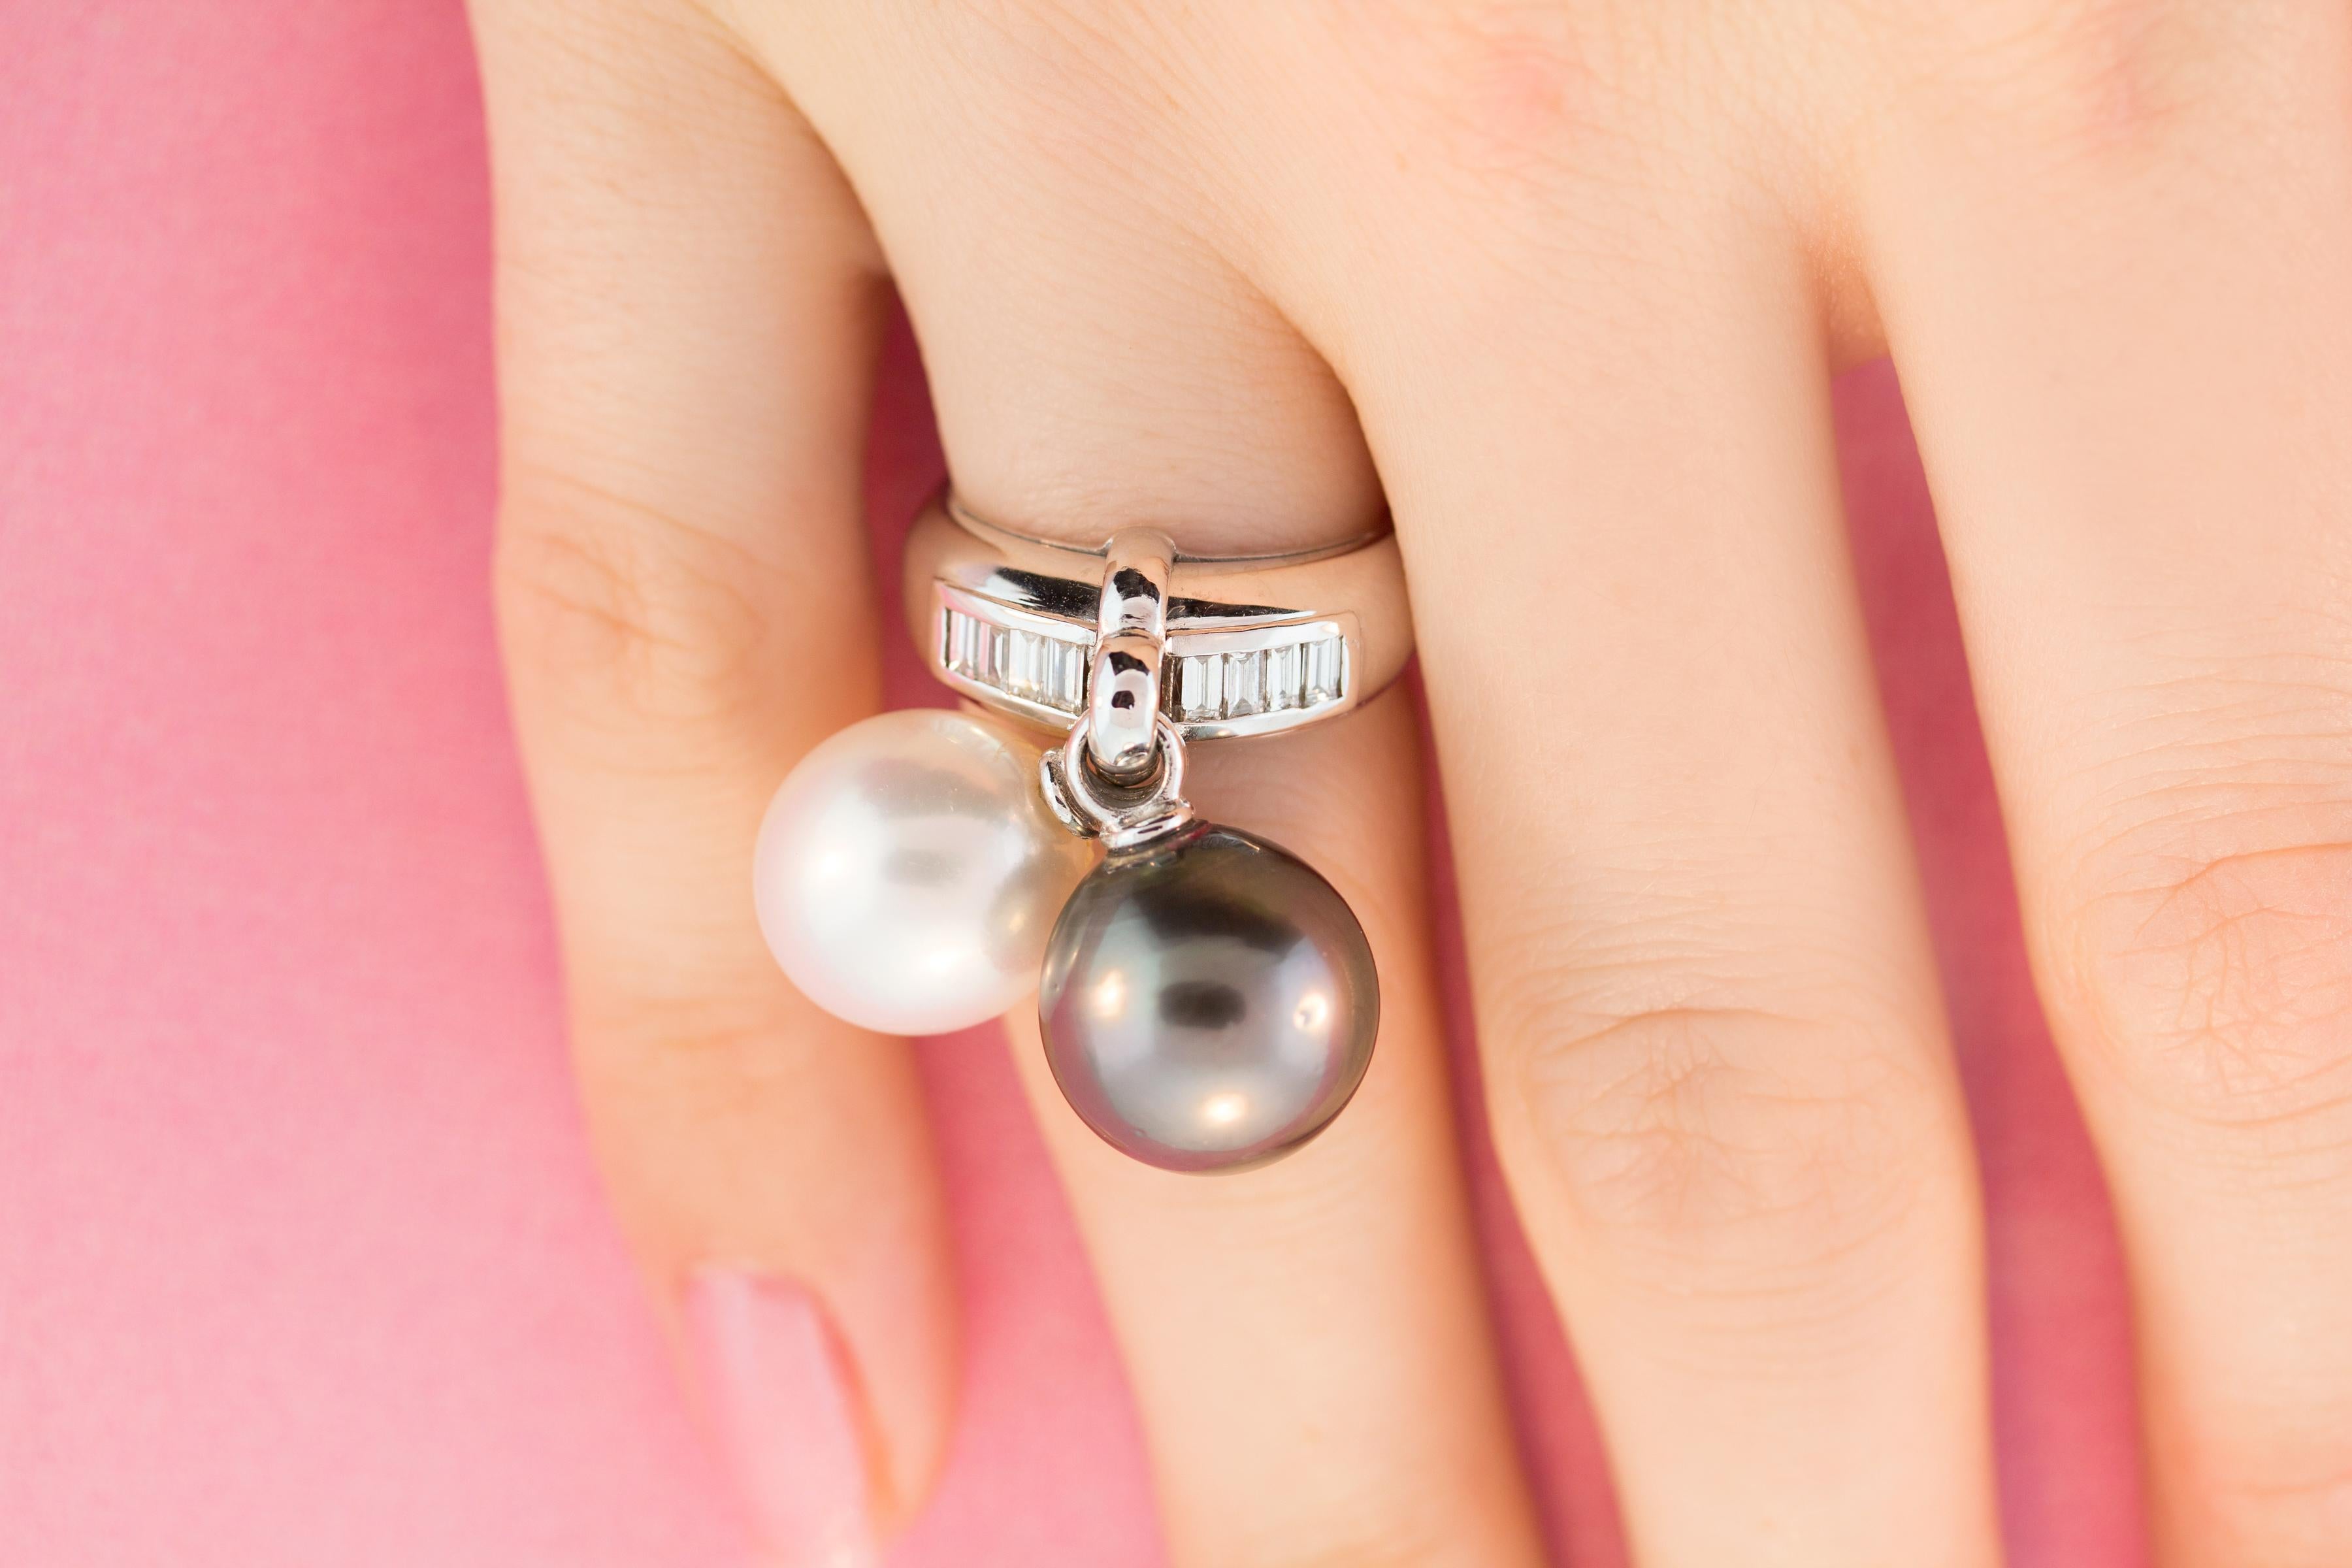 This pearl and diamond ring features two pearls of 12mm diameter each. The pearls are untreated. They display a fine nacre and their natural color and luster have not been enhanced in any way. Each pearl is separately attached to the center of the